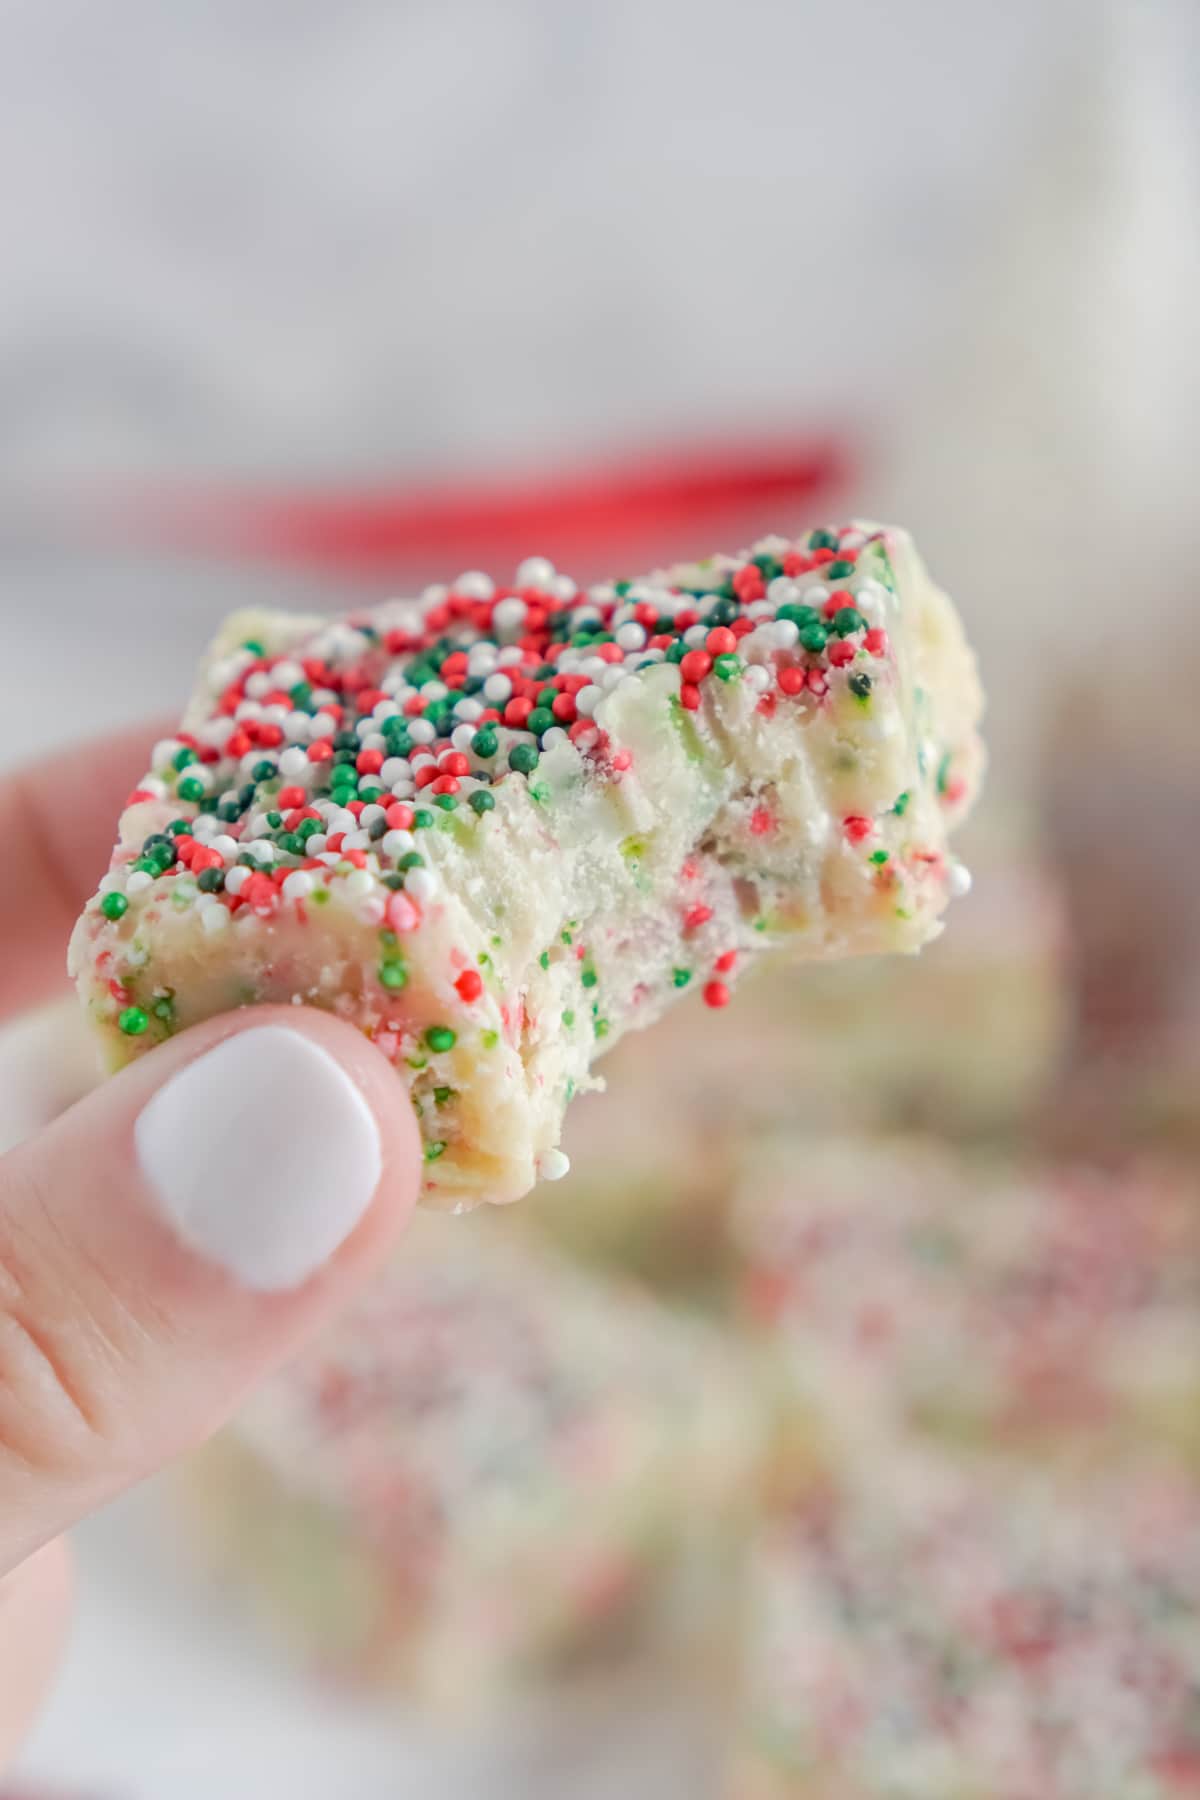 Woman's hand holding white chocolate fudge with sprinkles